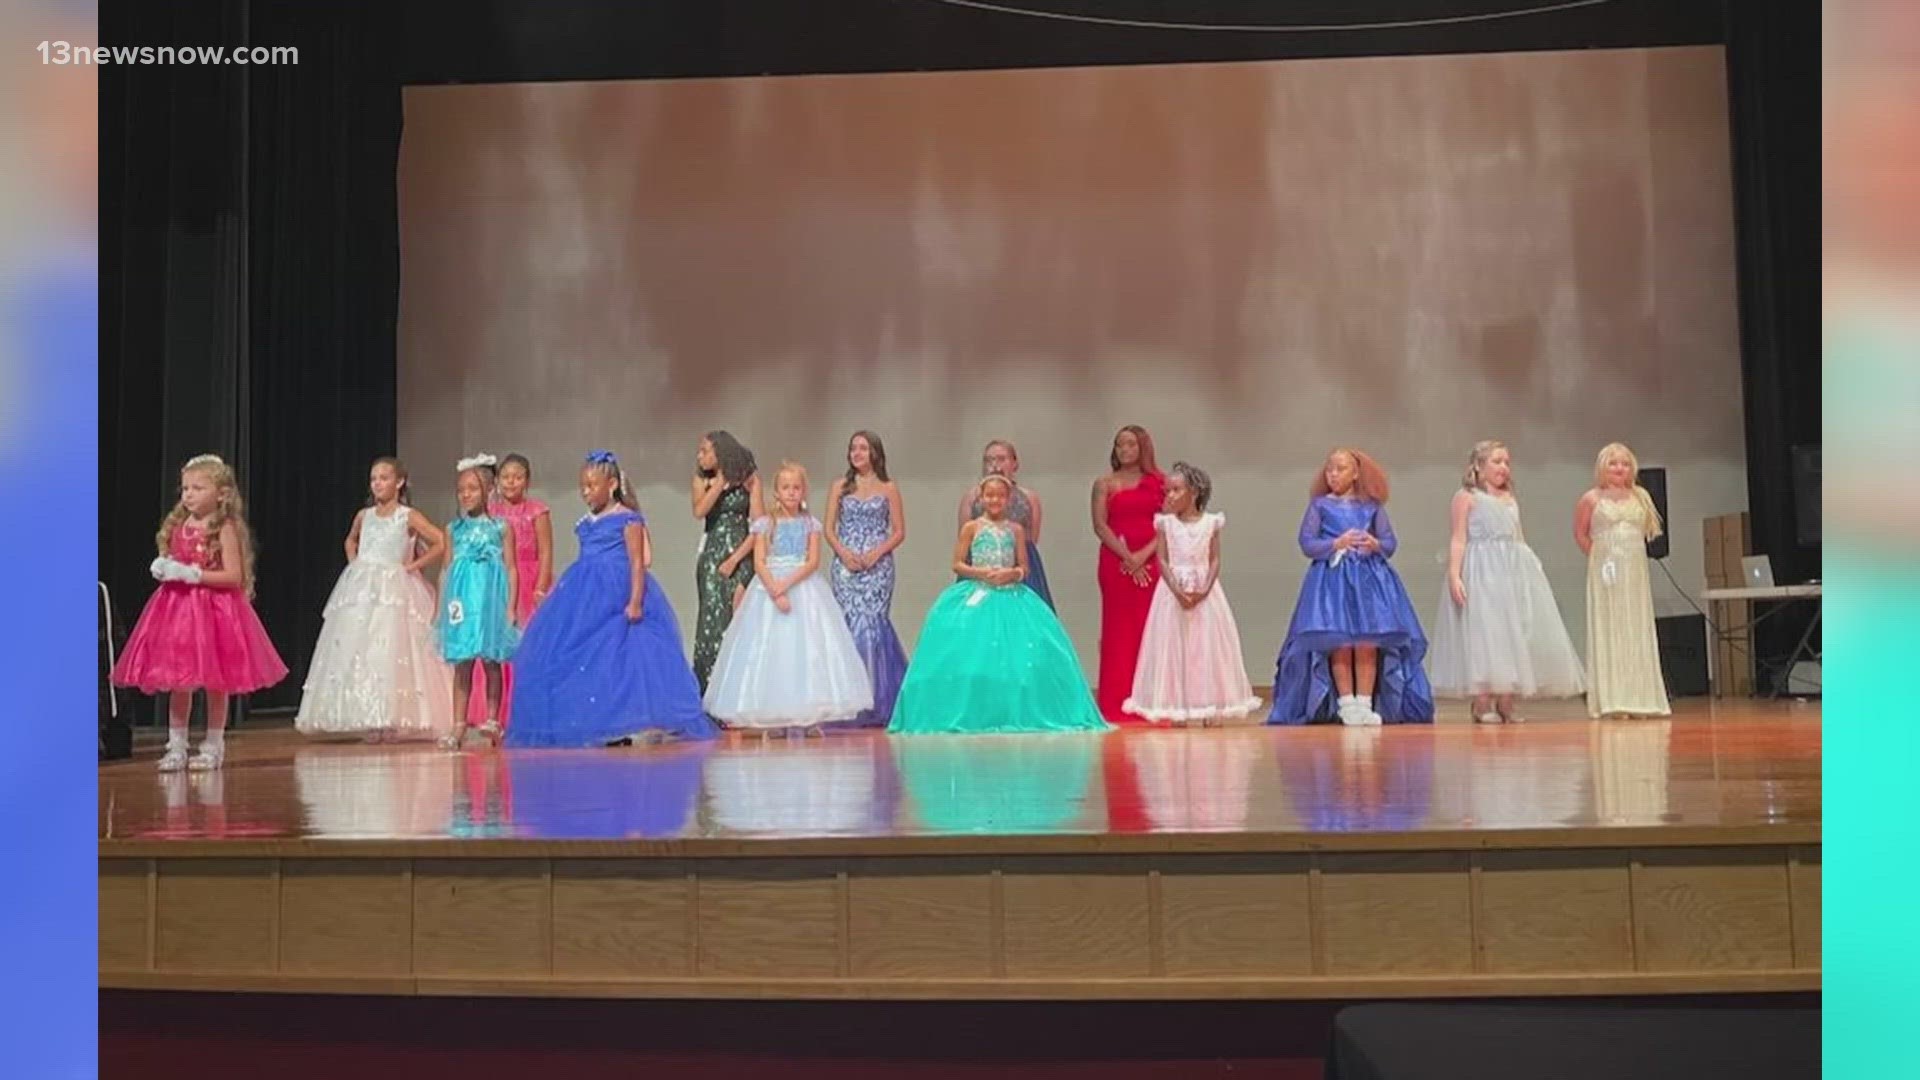 The pageant promotes diversity but also works to make it affordable for every young girl to participate. The pageant welcomes girls between the ages of 5 and 18.